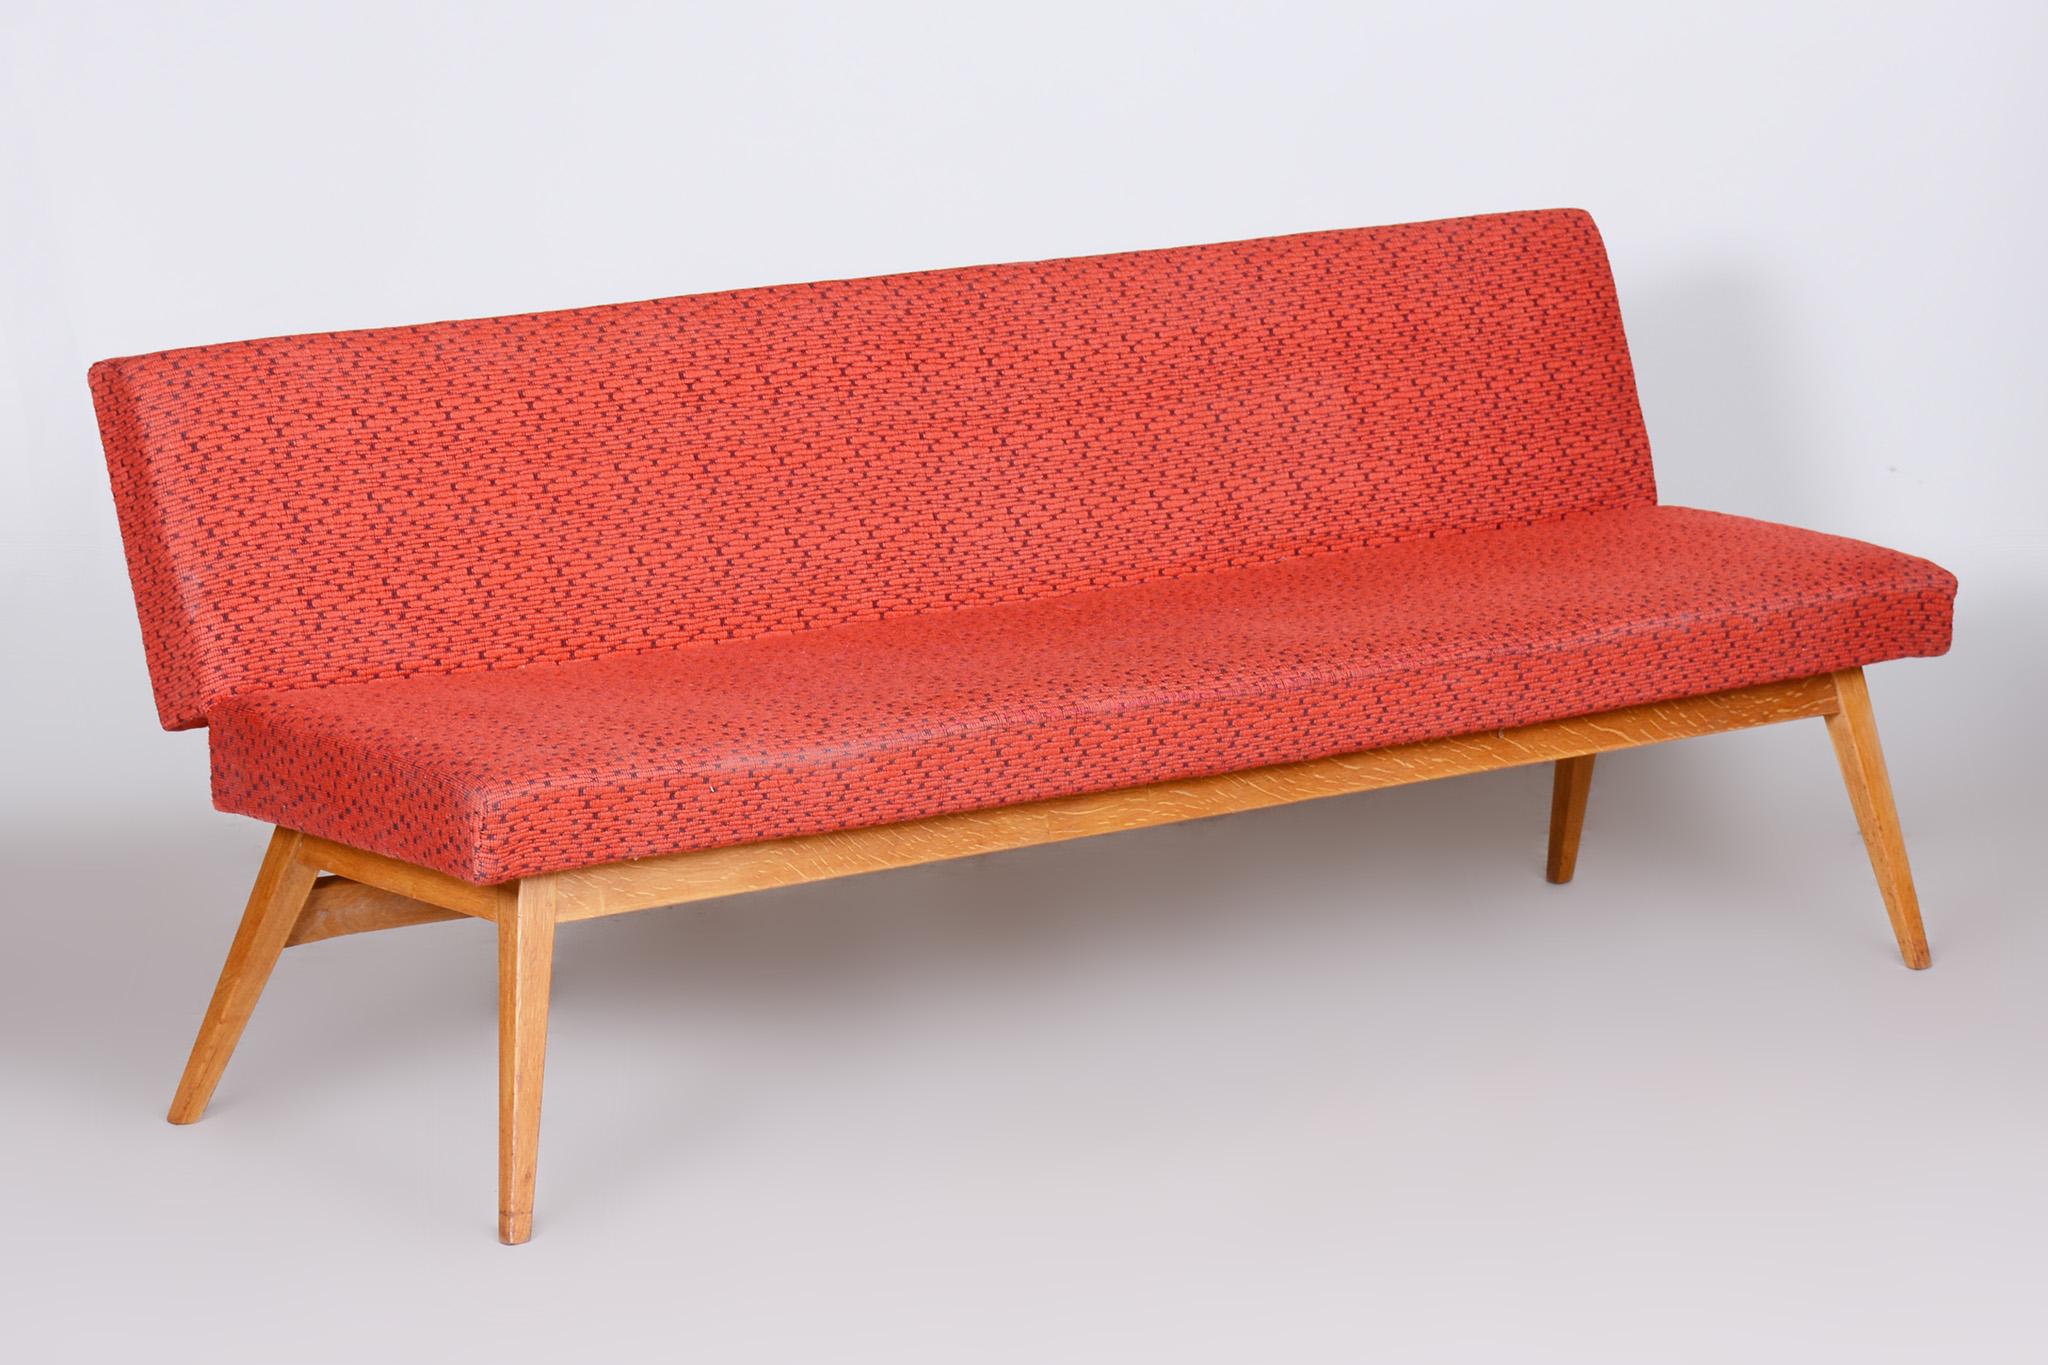 Red Midcentury Modern Oak Sofa, 1950s, Original well preserved upholstery For Sale 1